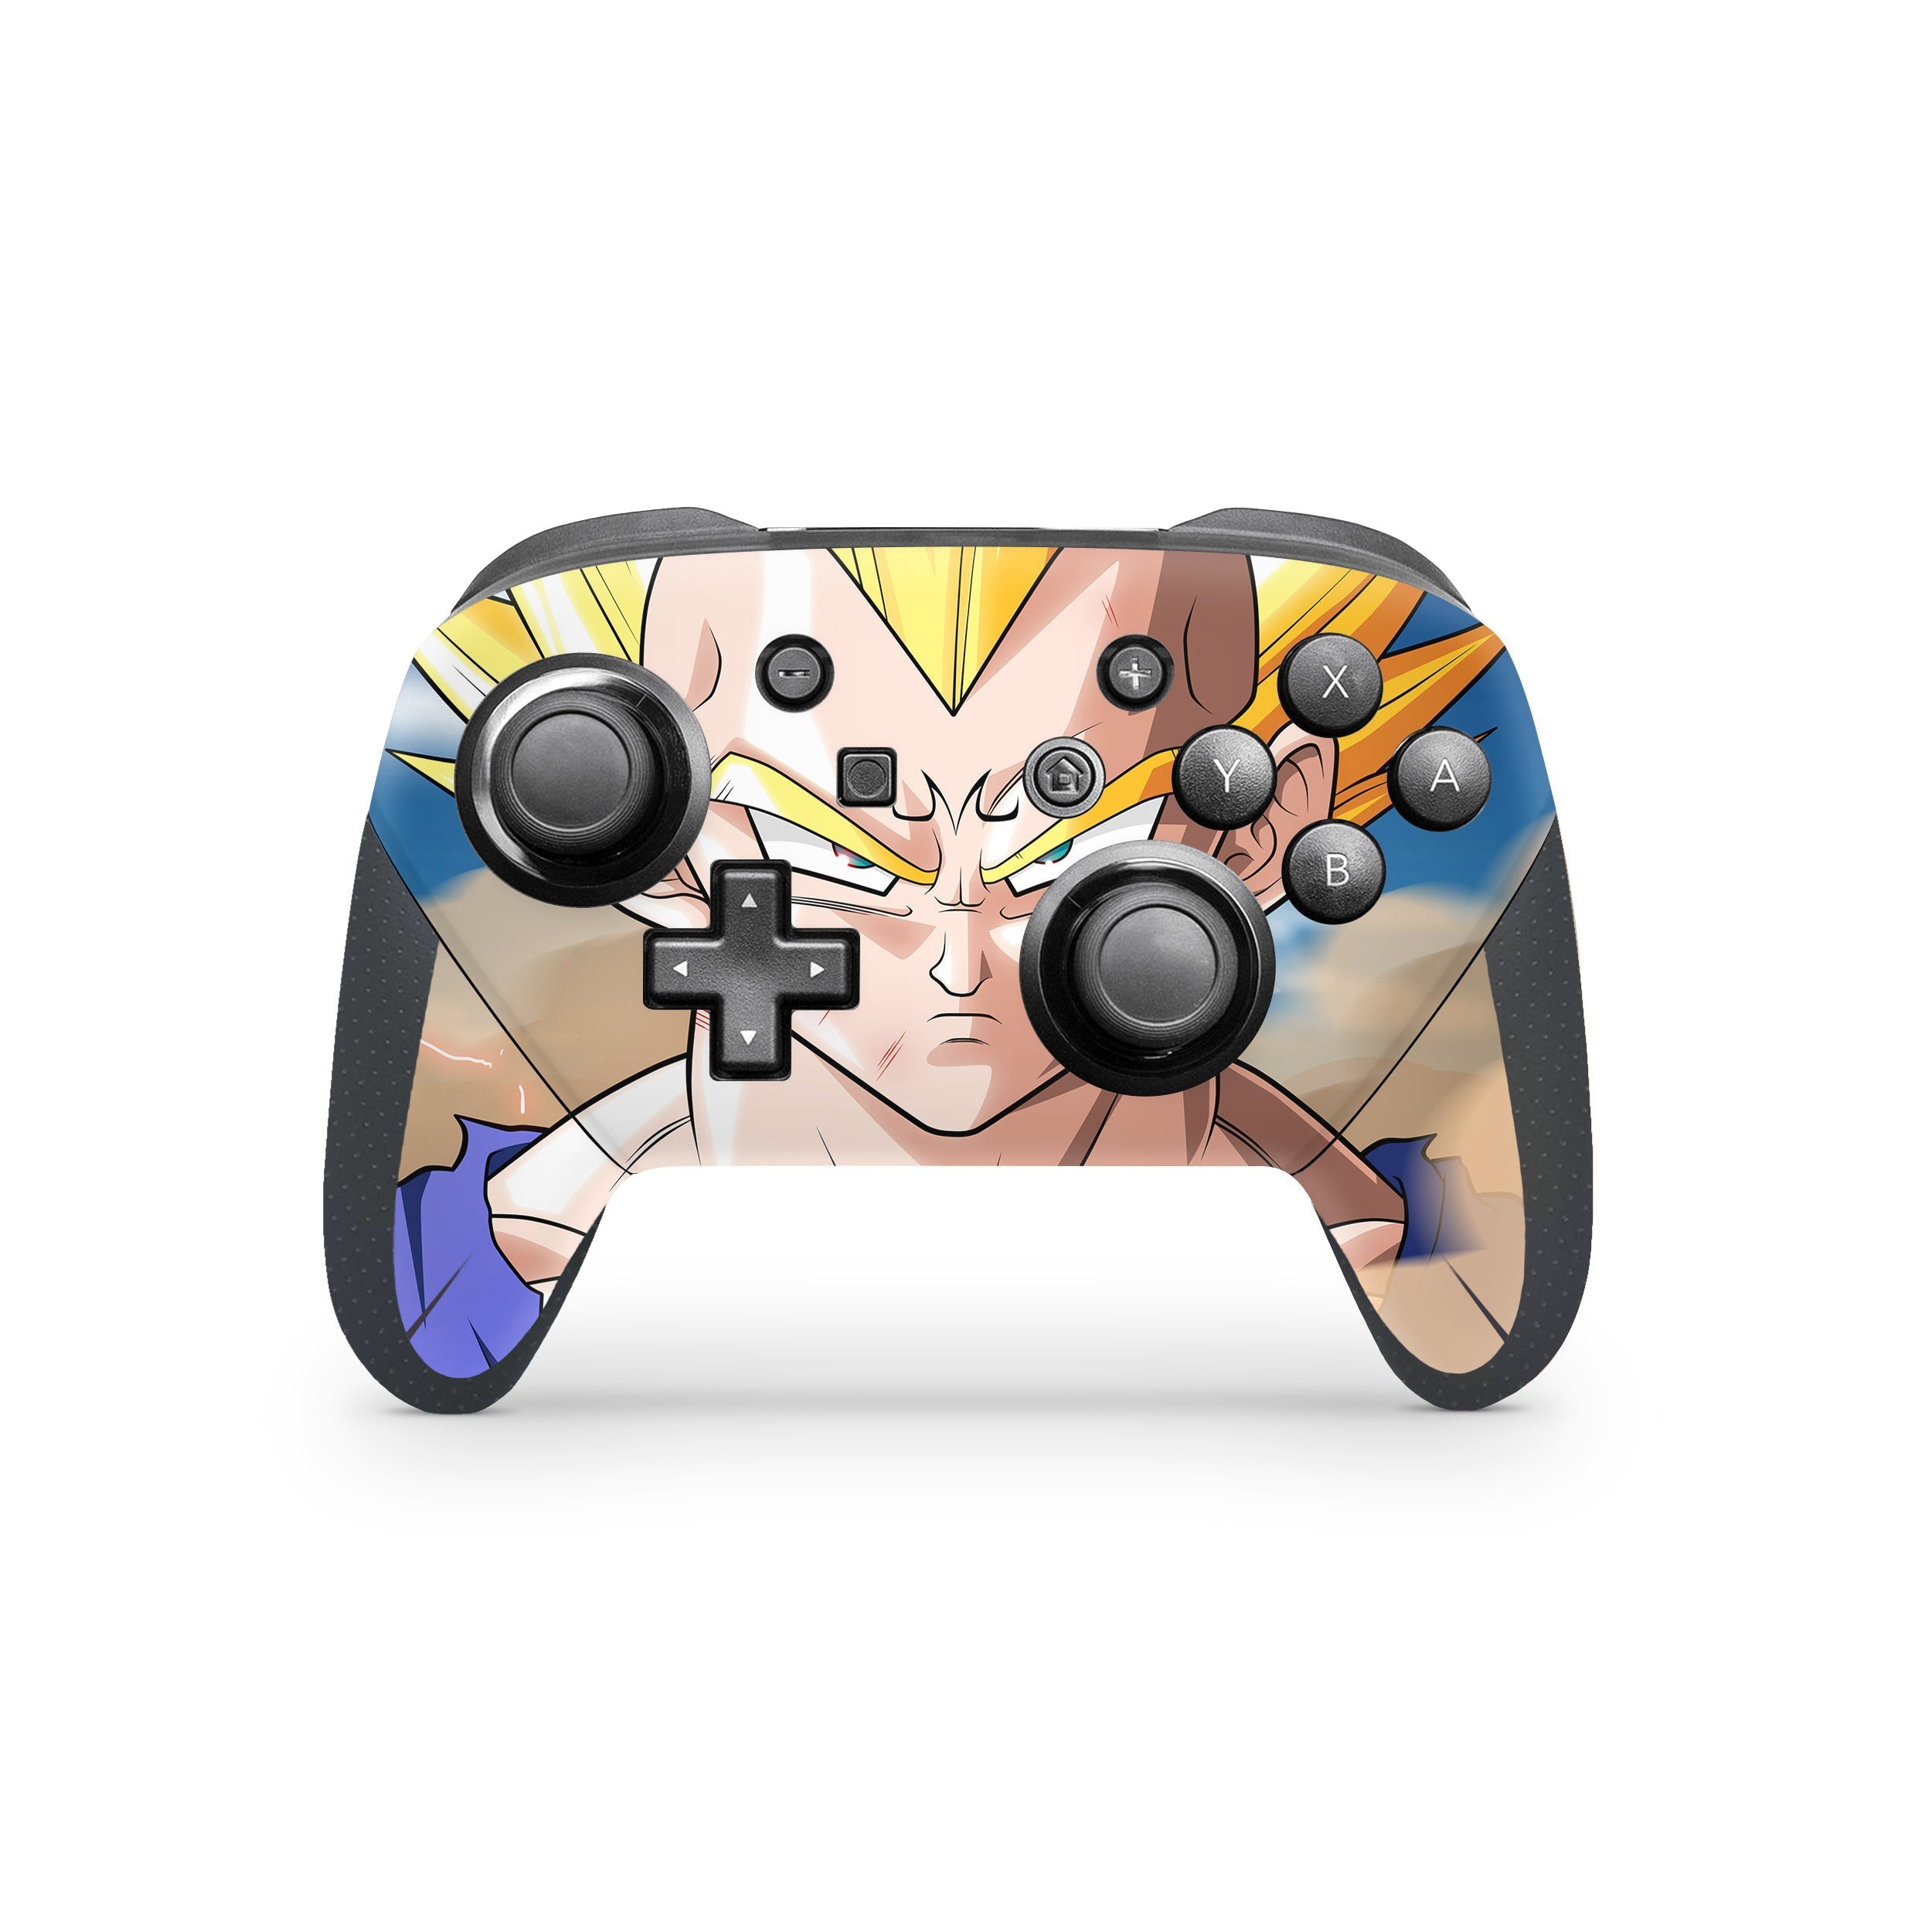 A video game skin featuring a Dragon Ball Z Vegeta design for the Switch Pro Controller.